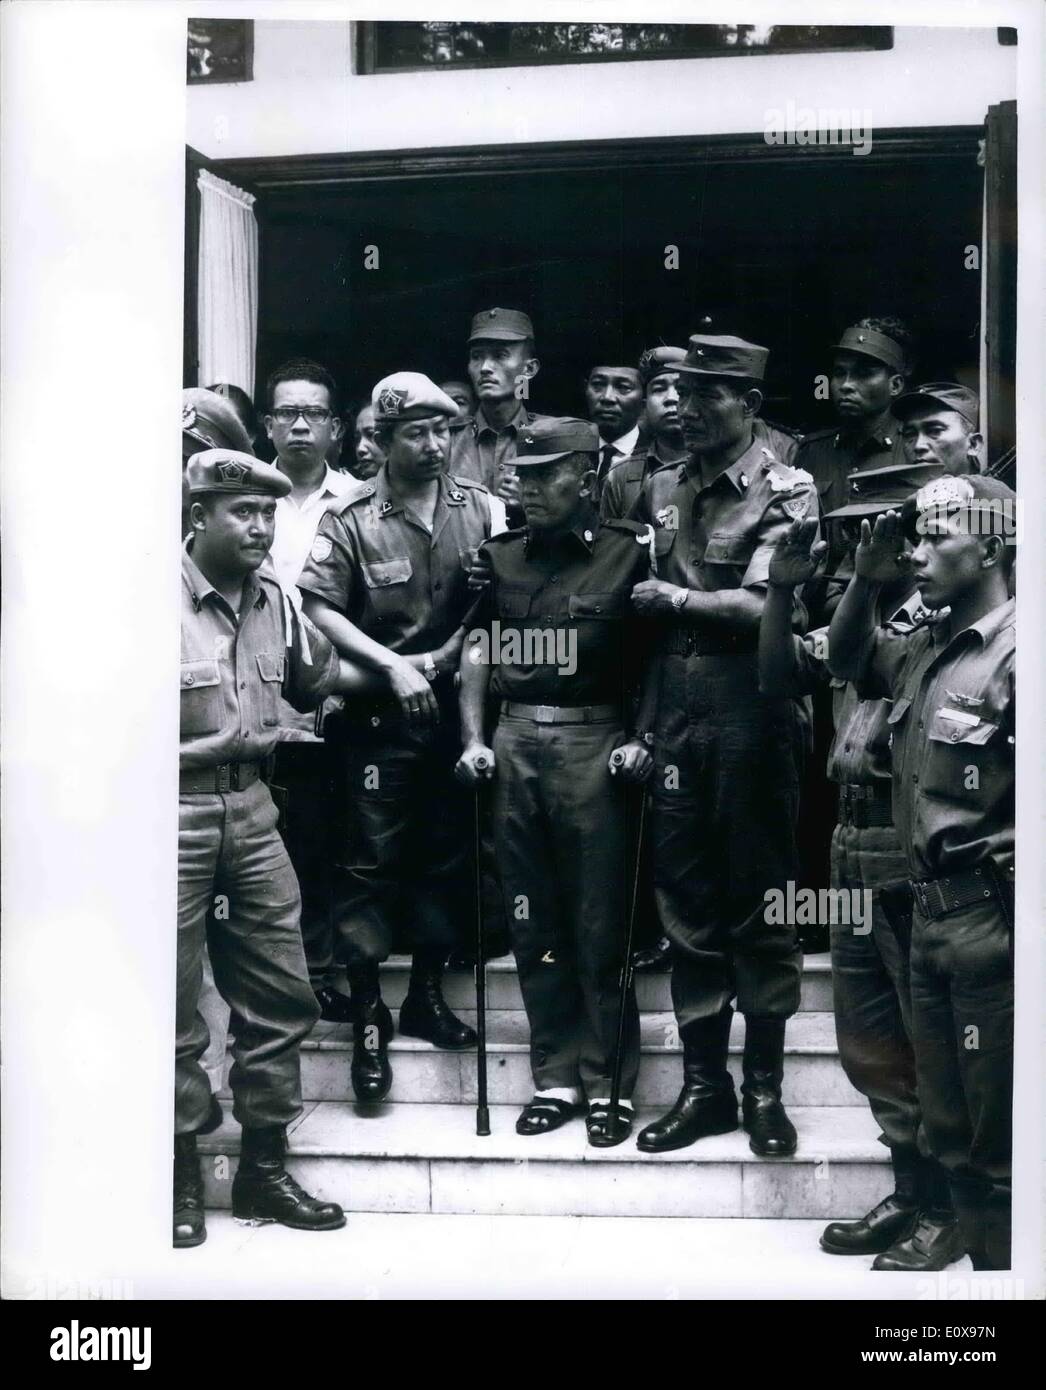 Oct. 10, 1965 - General Abdul Haris Nasution, Indonesian Defense Minister, on steps of his home in Djakarta, Oct. 7, 1965 during funeral for his 5-year old daughter who was fatally wounded during the abortive Communist coup of Oct. 1, 1965, Grief stricken, he is being helped by an aide. Nasution escaped by jumping over the back fence and hiding in Iraqi embassy. In doing so, he injured his ankles. Stock Photo